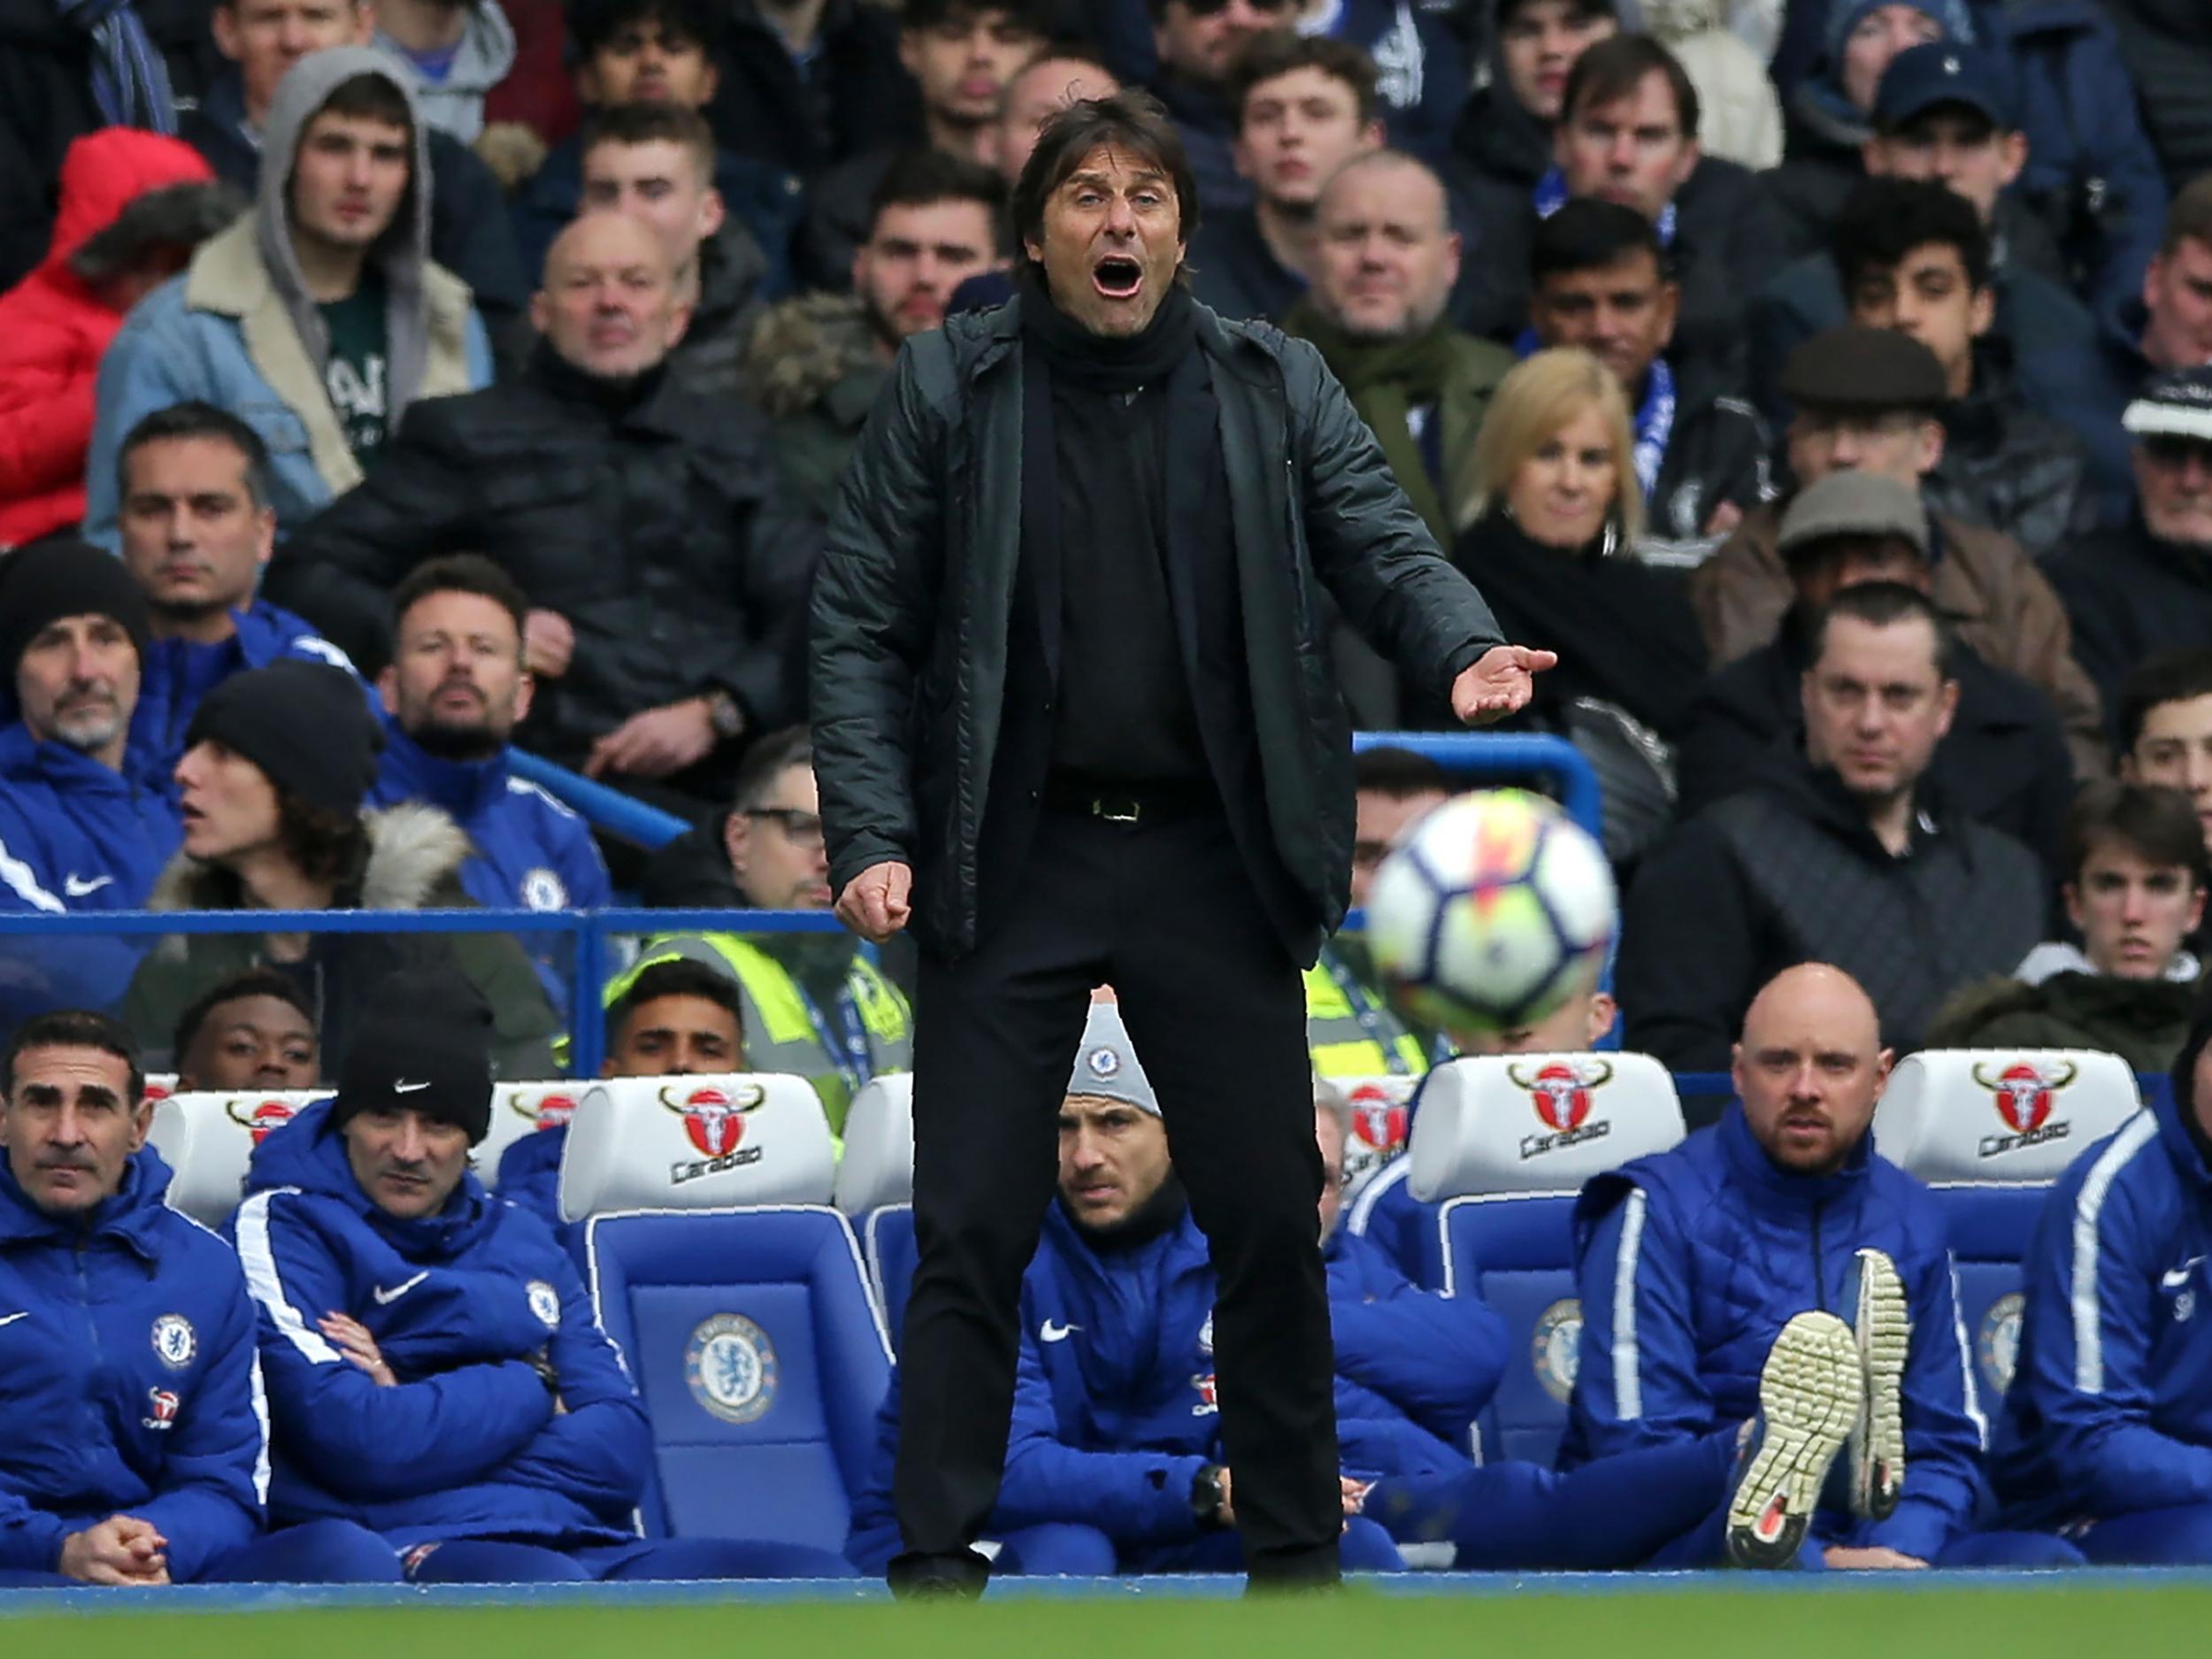 Antonio Conte says he's "not worried" about losing his job